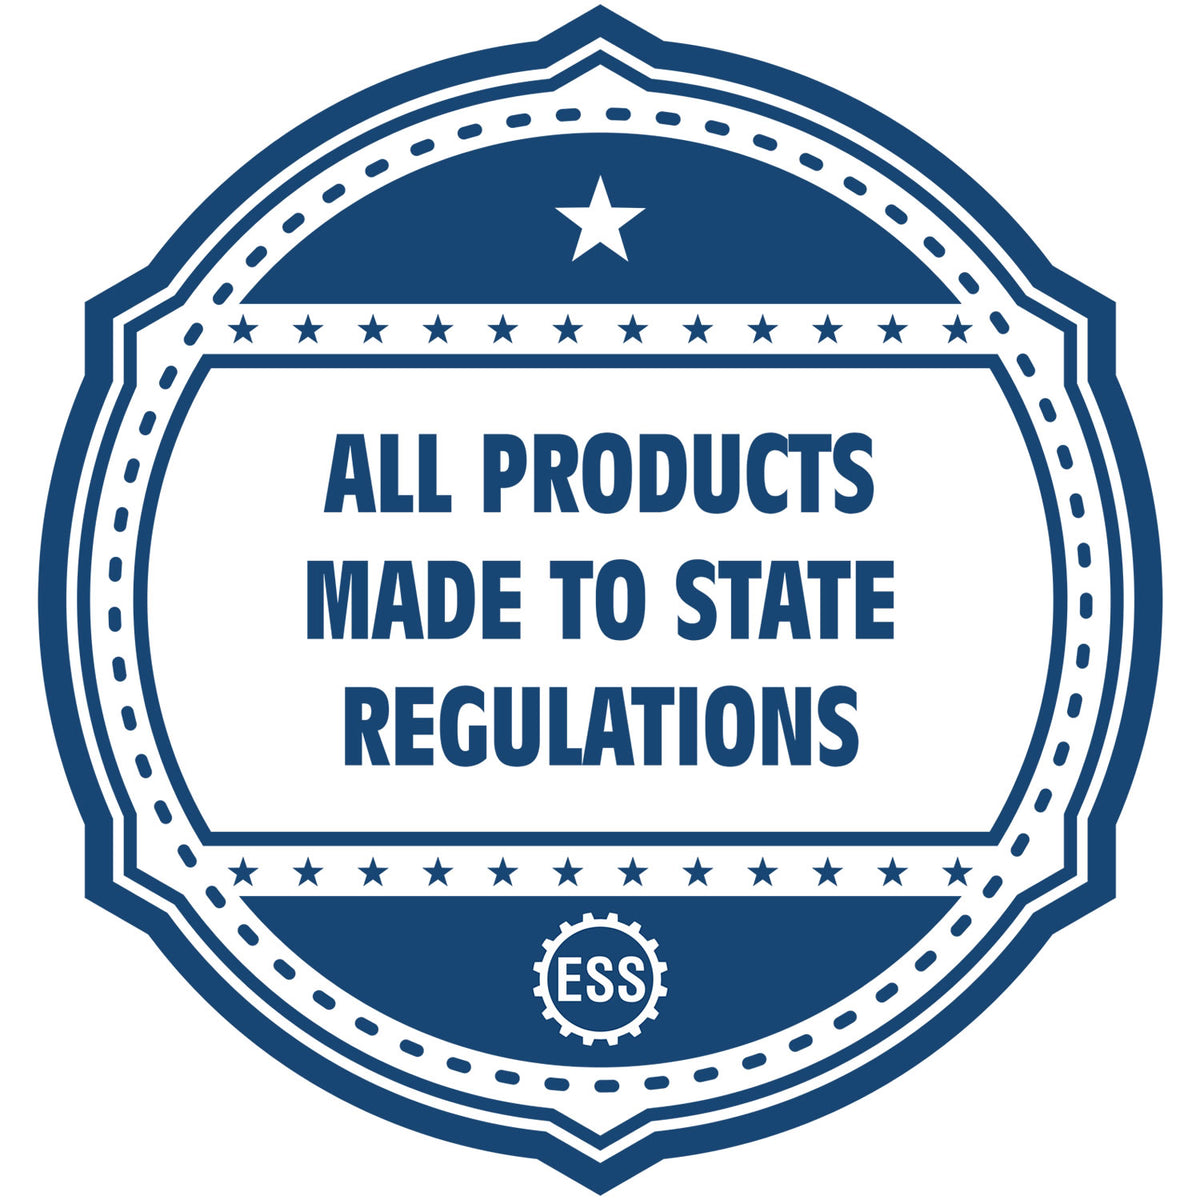 An icon or badge element for the Premium MaxLight Pre-Inked Wyoming Engineering Stamp showing that this product is made in compliance with state regulations.